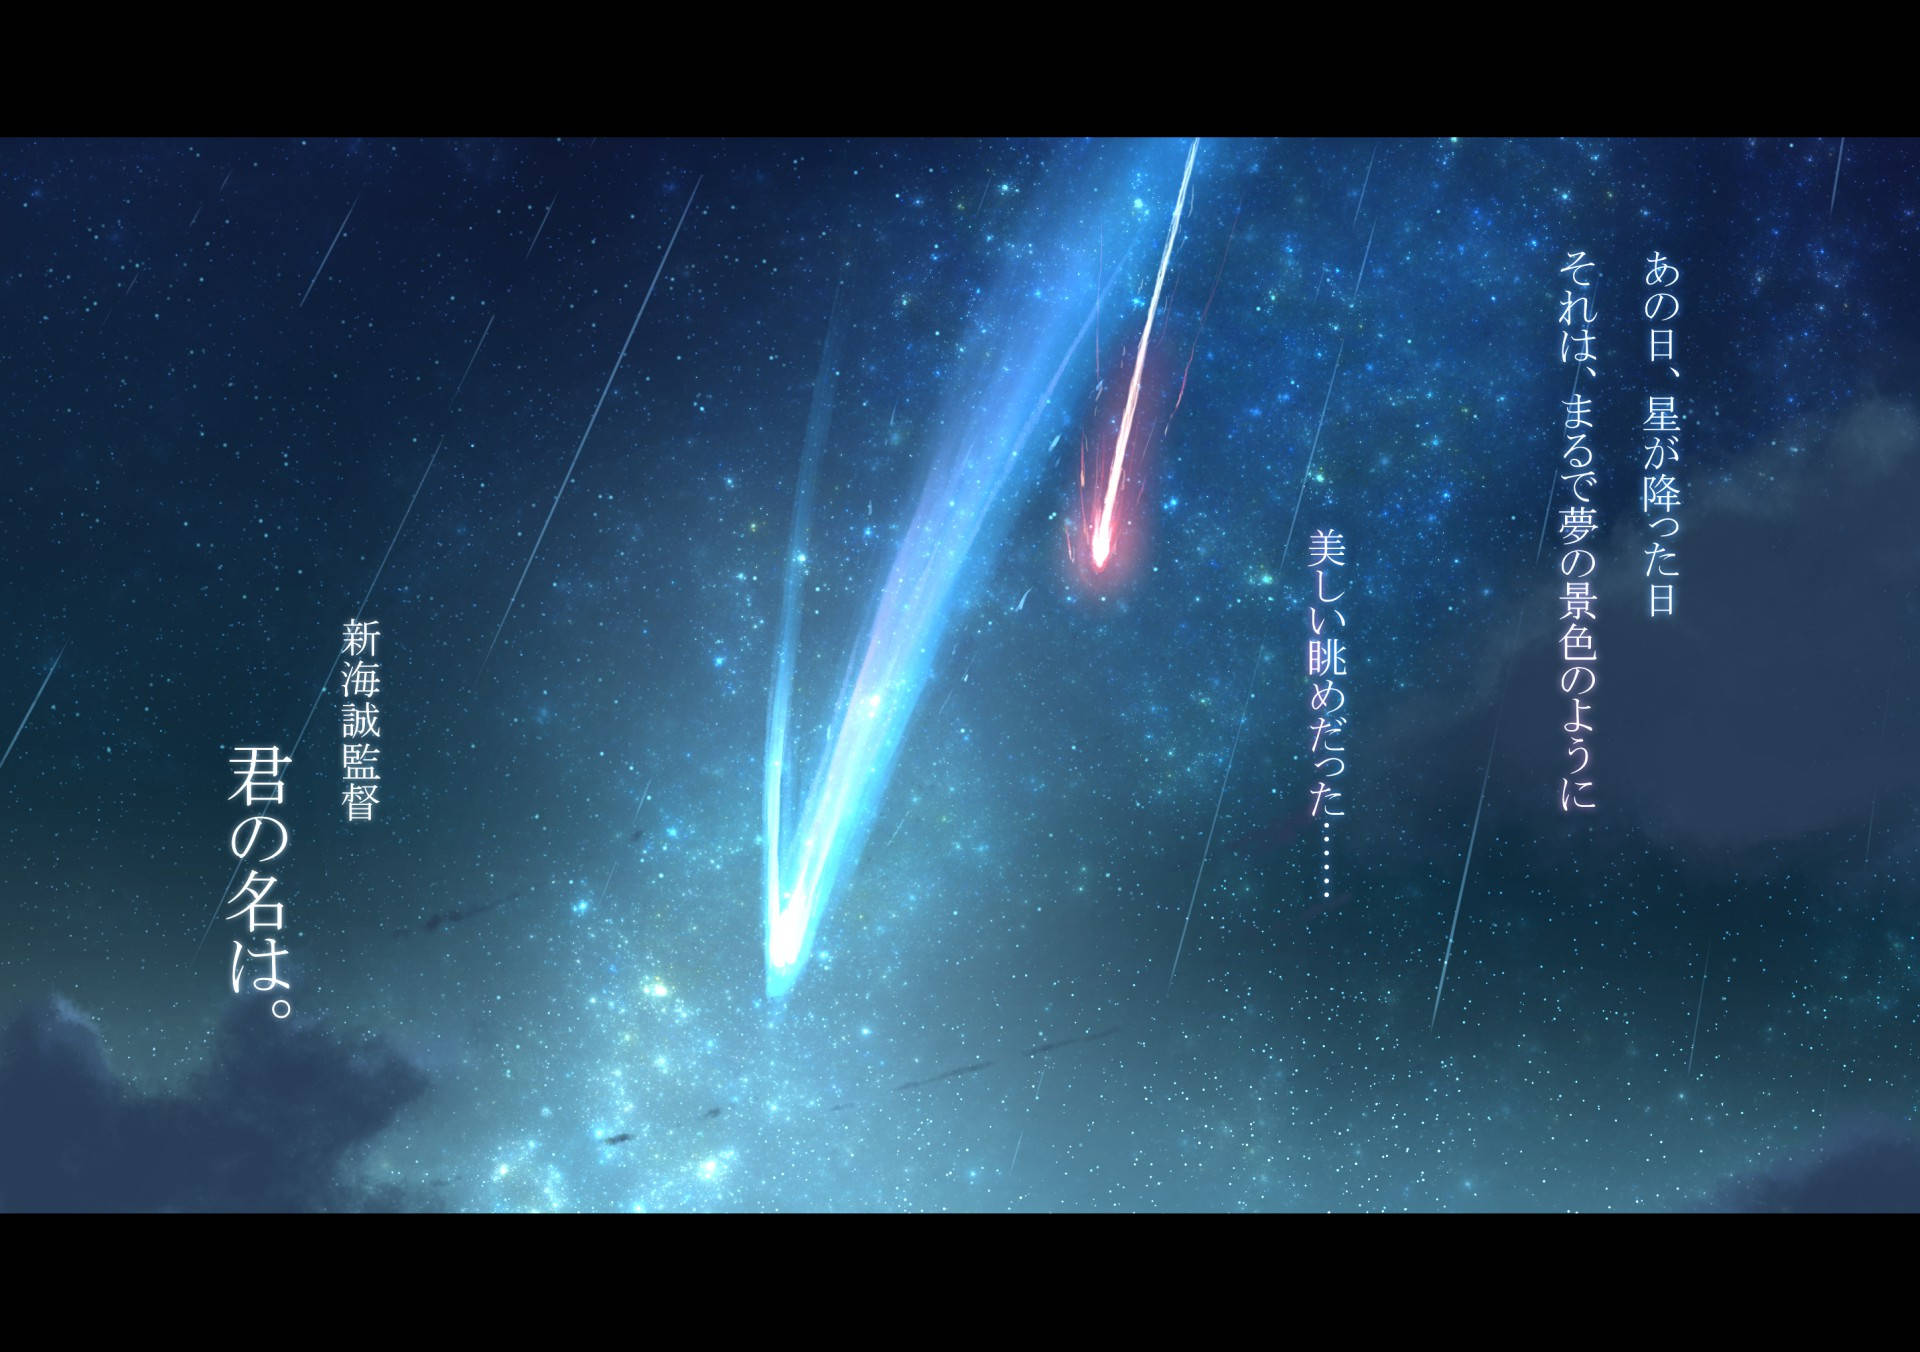 Sky Comet Your Name Anime 2016 Background